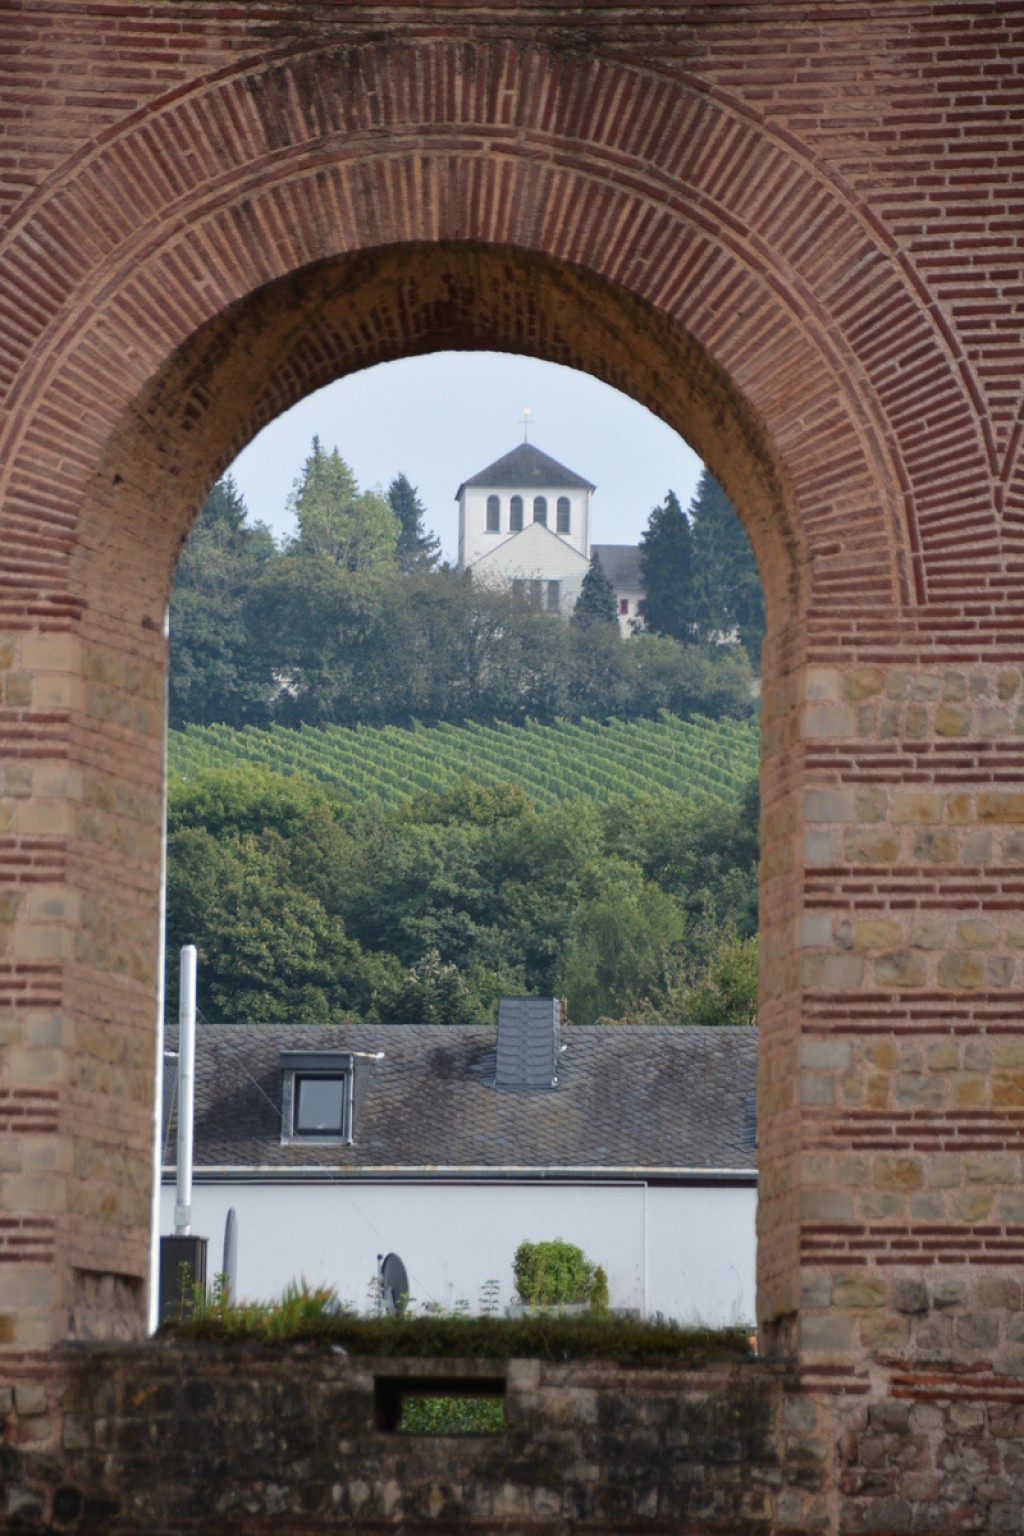 Winery seen through an arch in the Imperial Baths